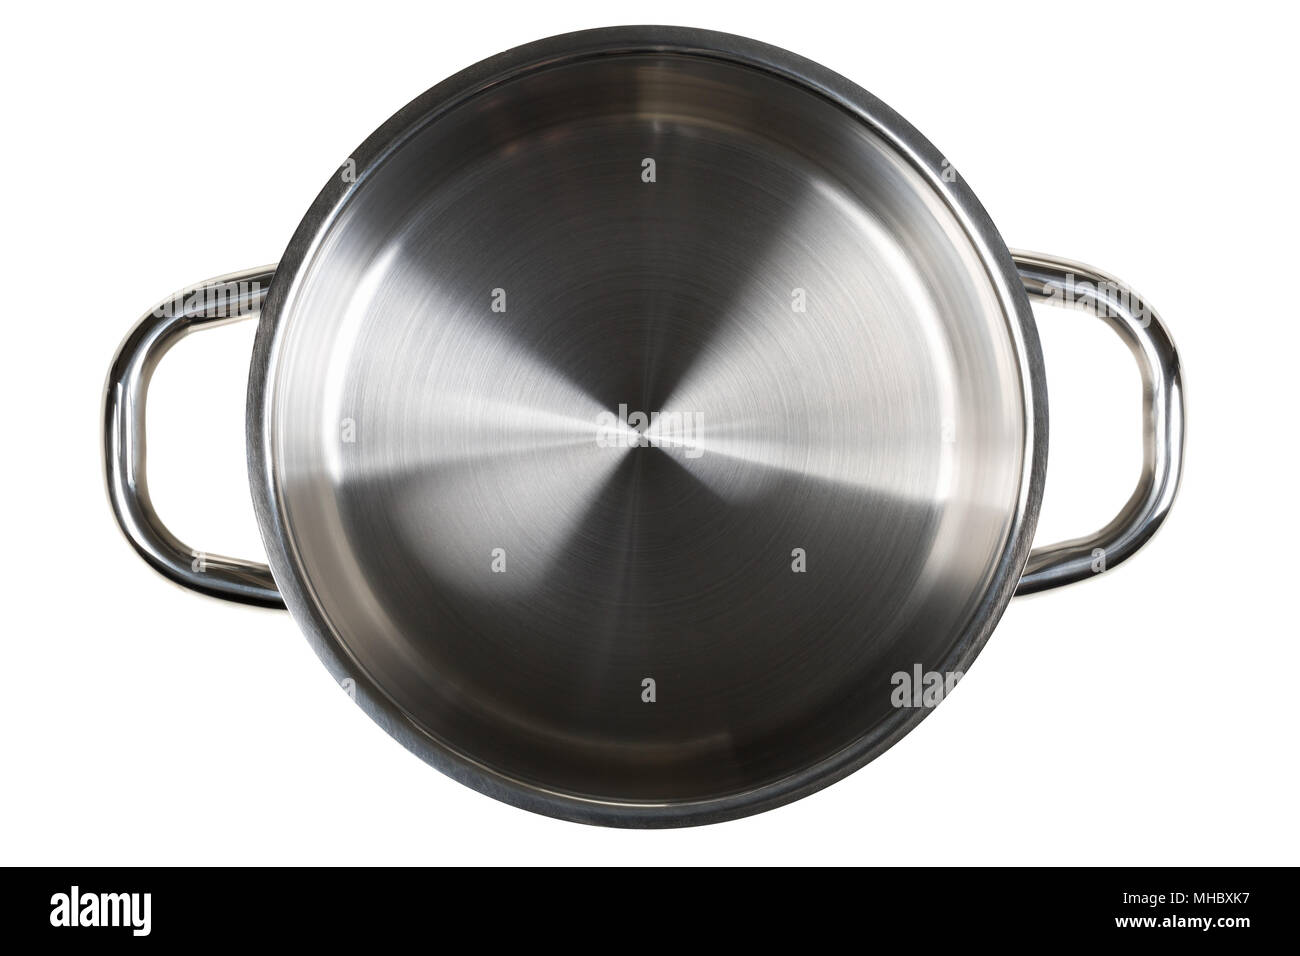 https://c8.alamy.com/comp/MHBXK7/empty-open-stainless-steel-cooking-pot-top-view-from-above-isolated-on-white-background-MHBXK7.jpg